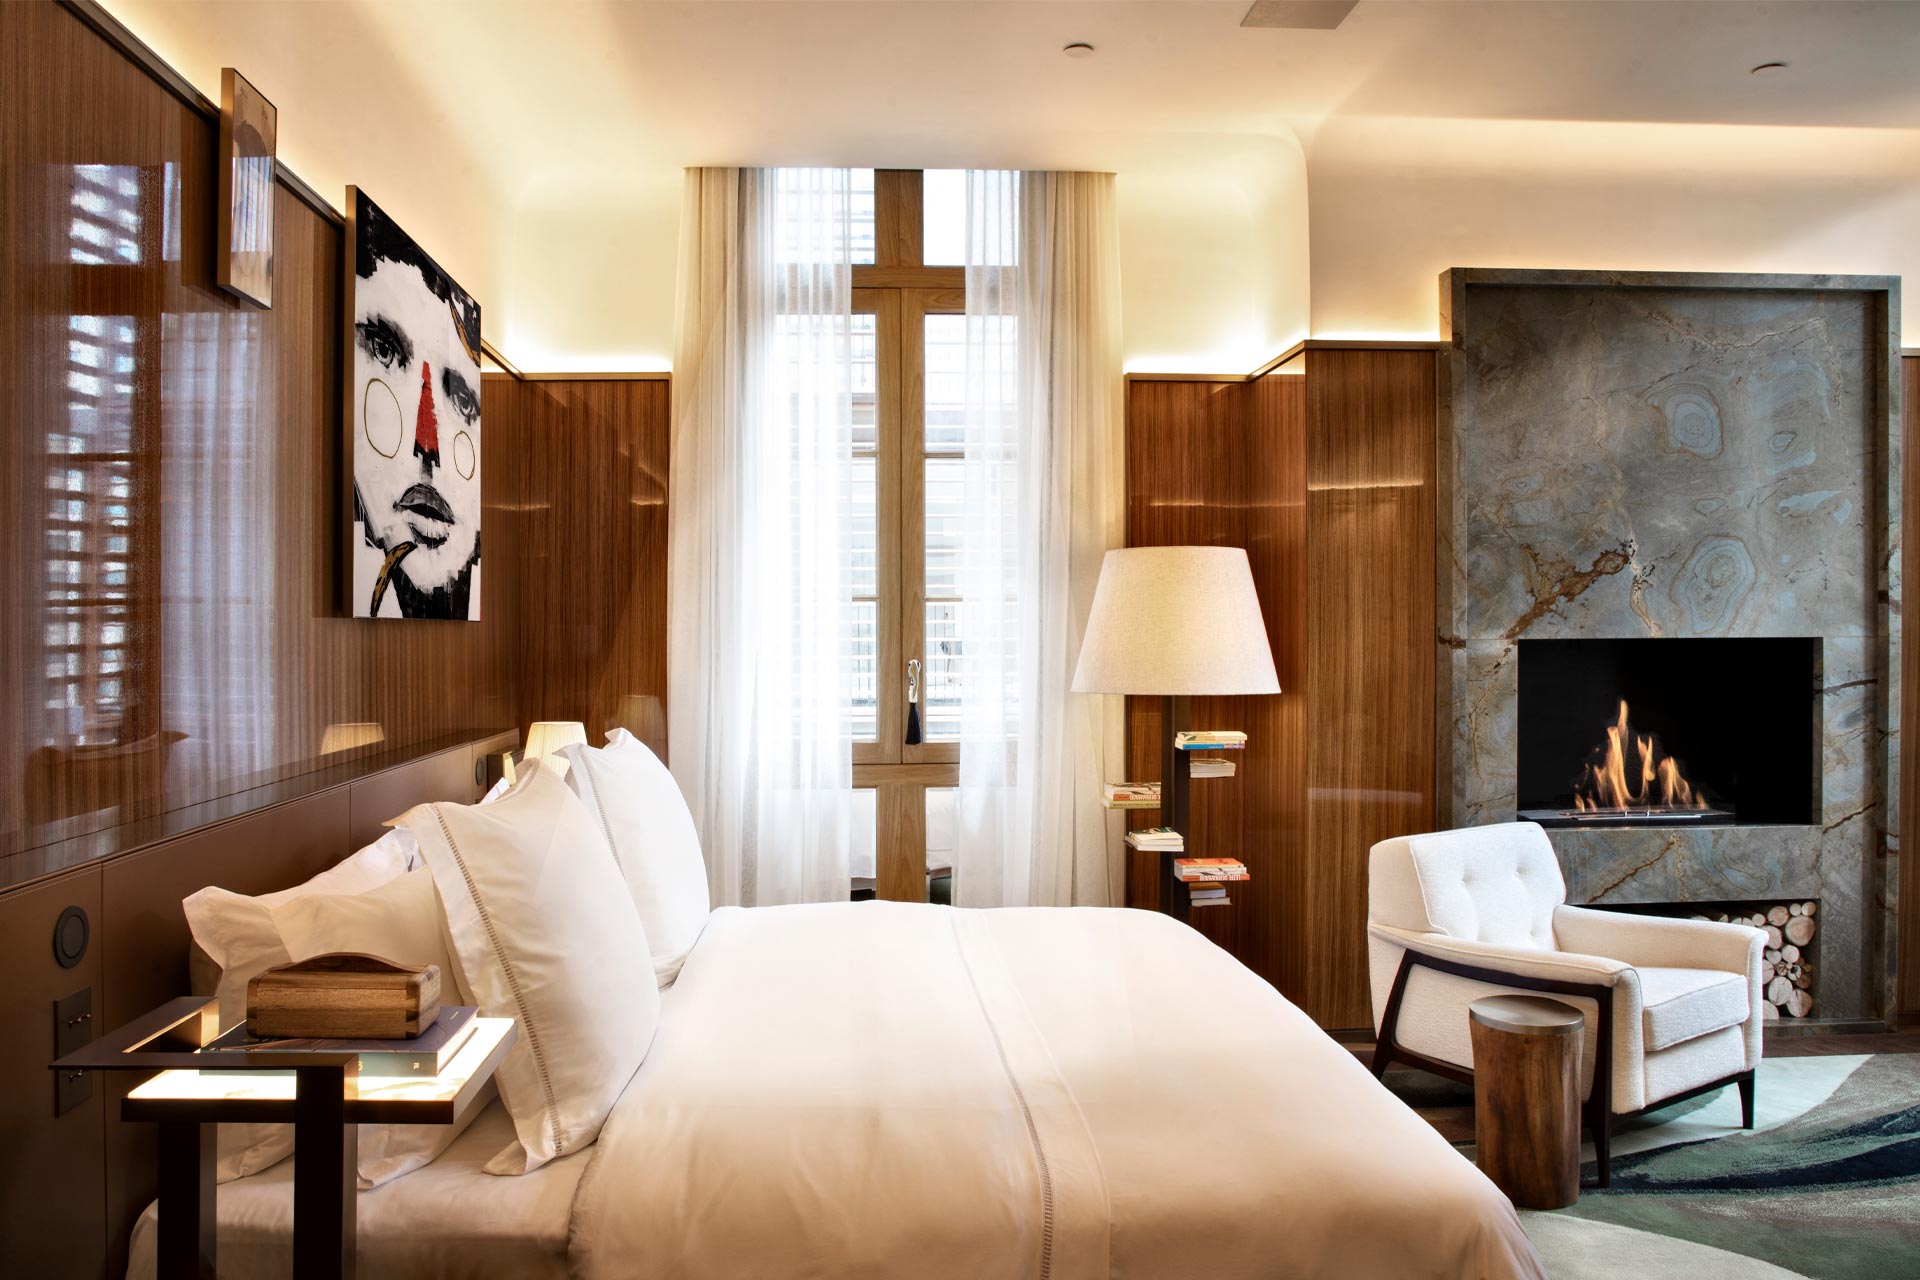 A guestroom at Rosewood Sao Paulo in Brazil